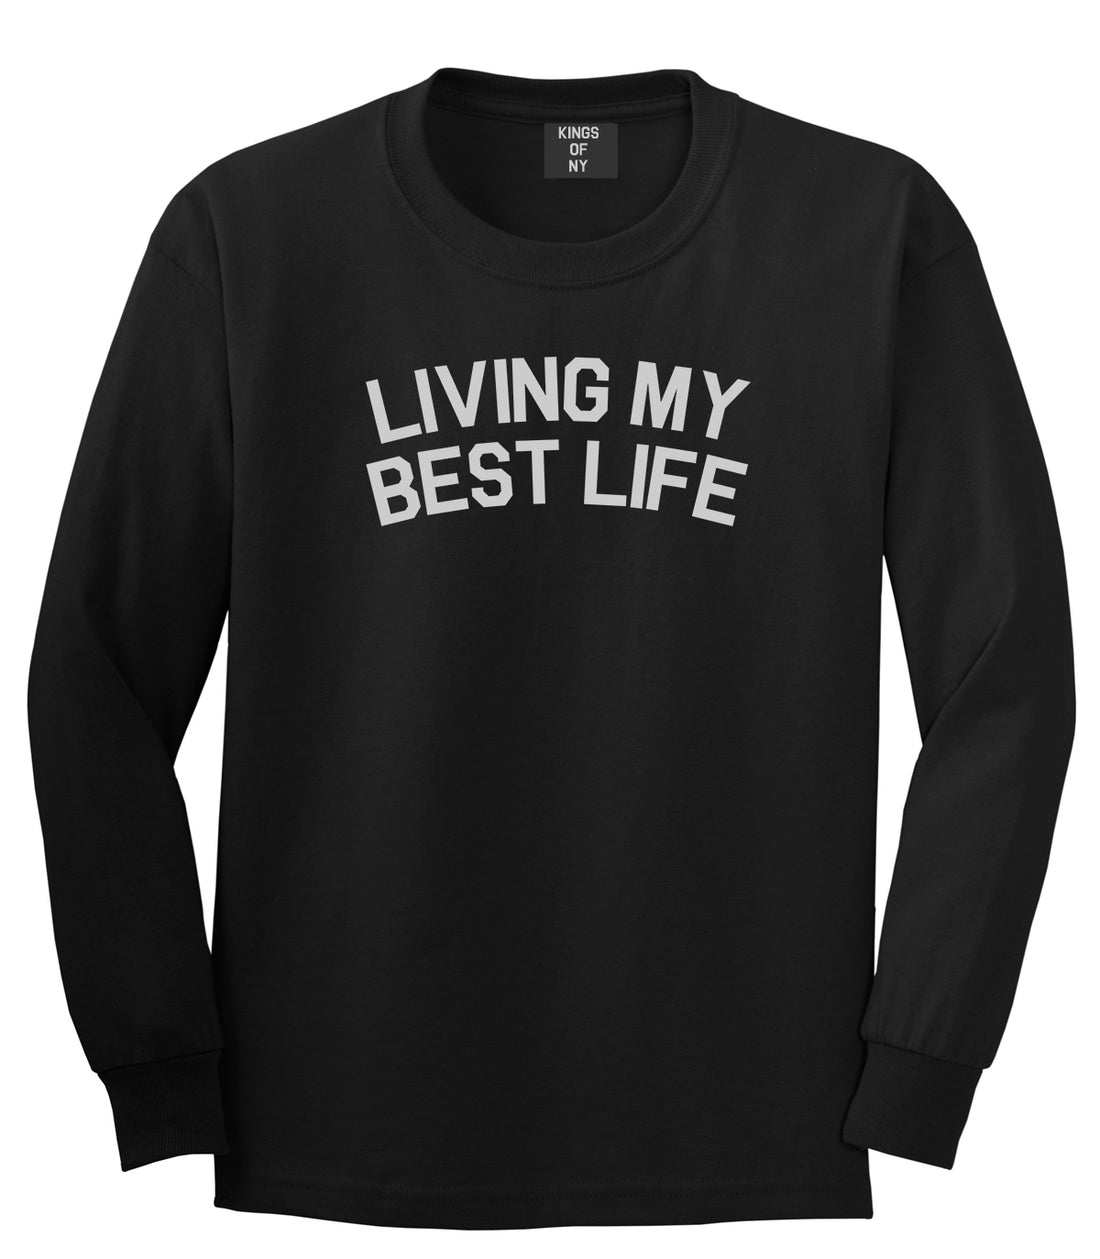 Living My Best Life Mens Long Sleeve T-Shirt Black by Kings Of NY